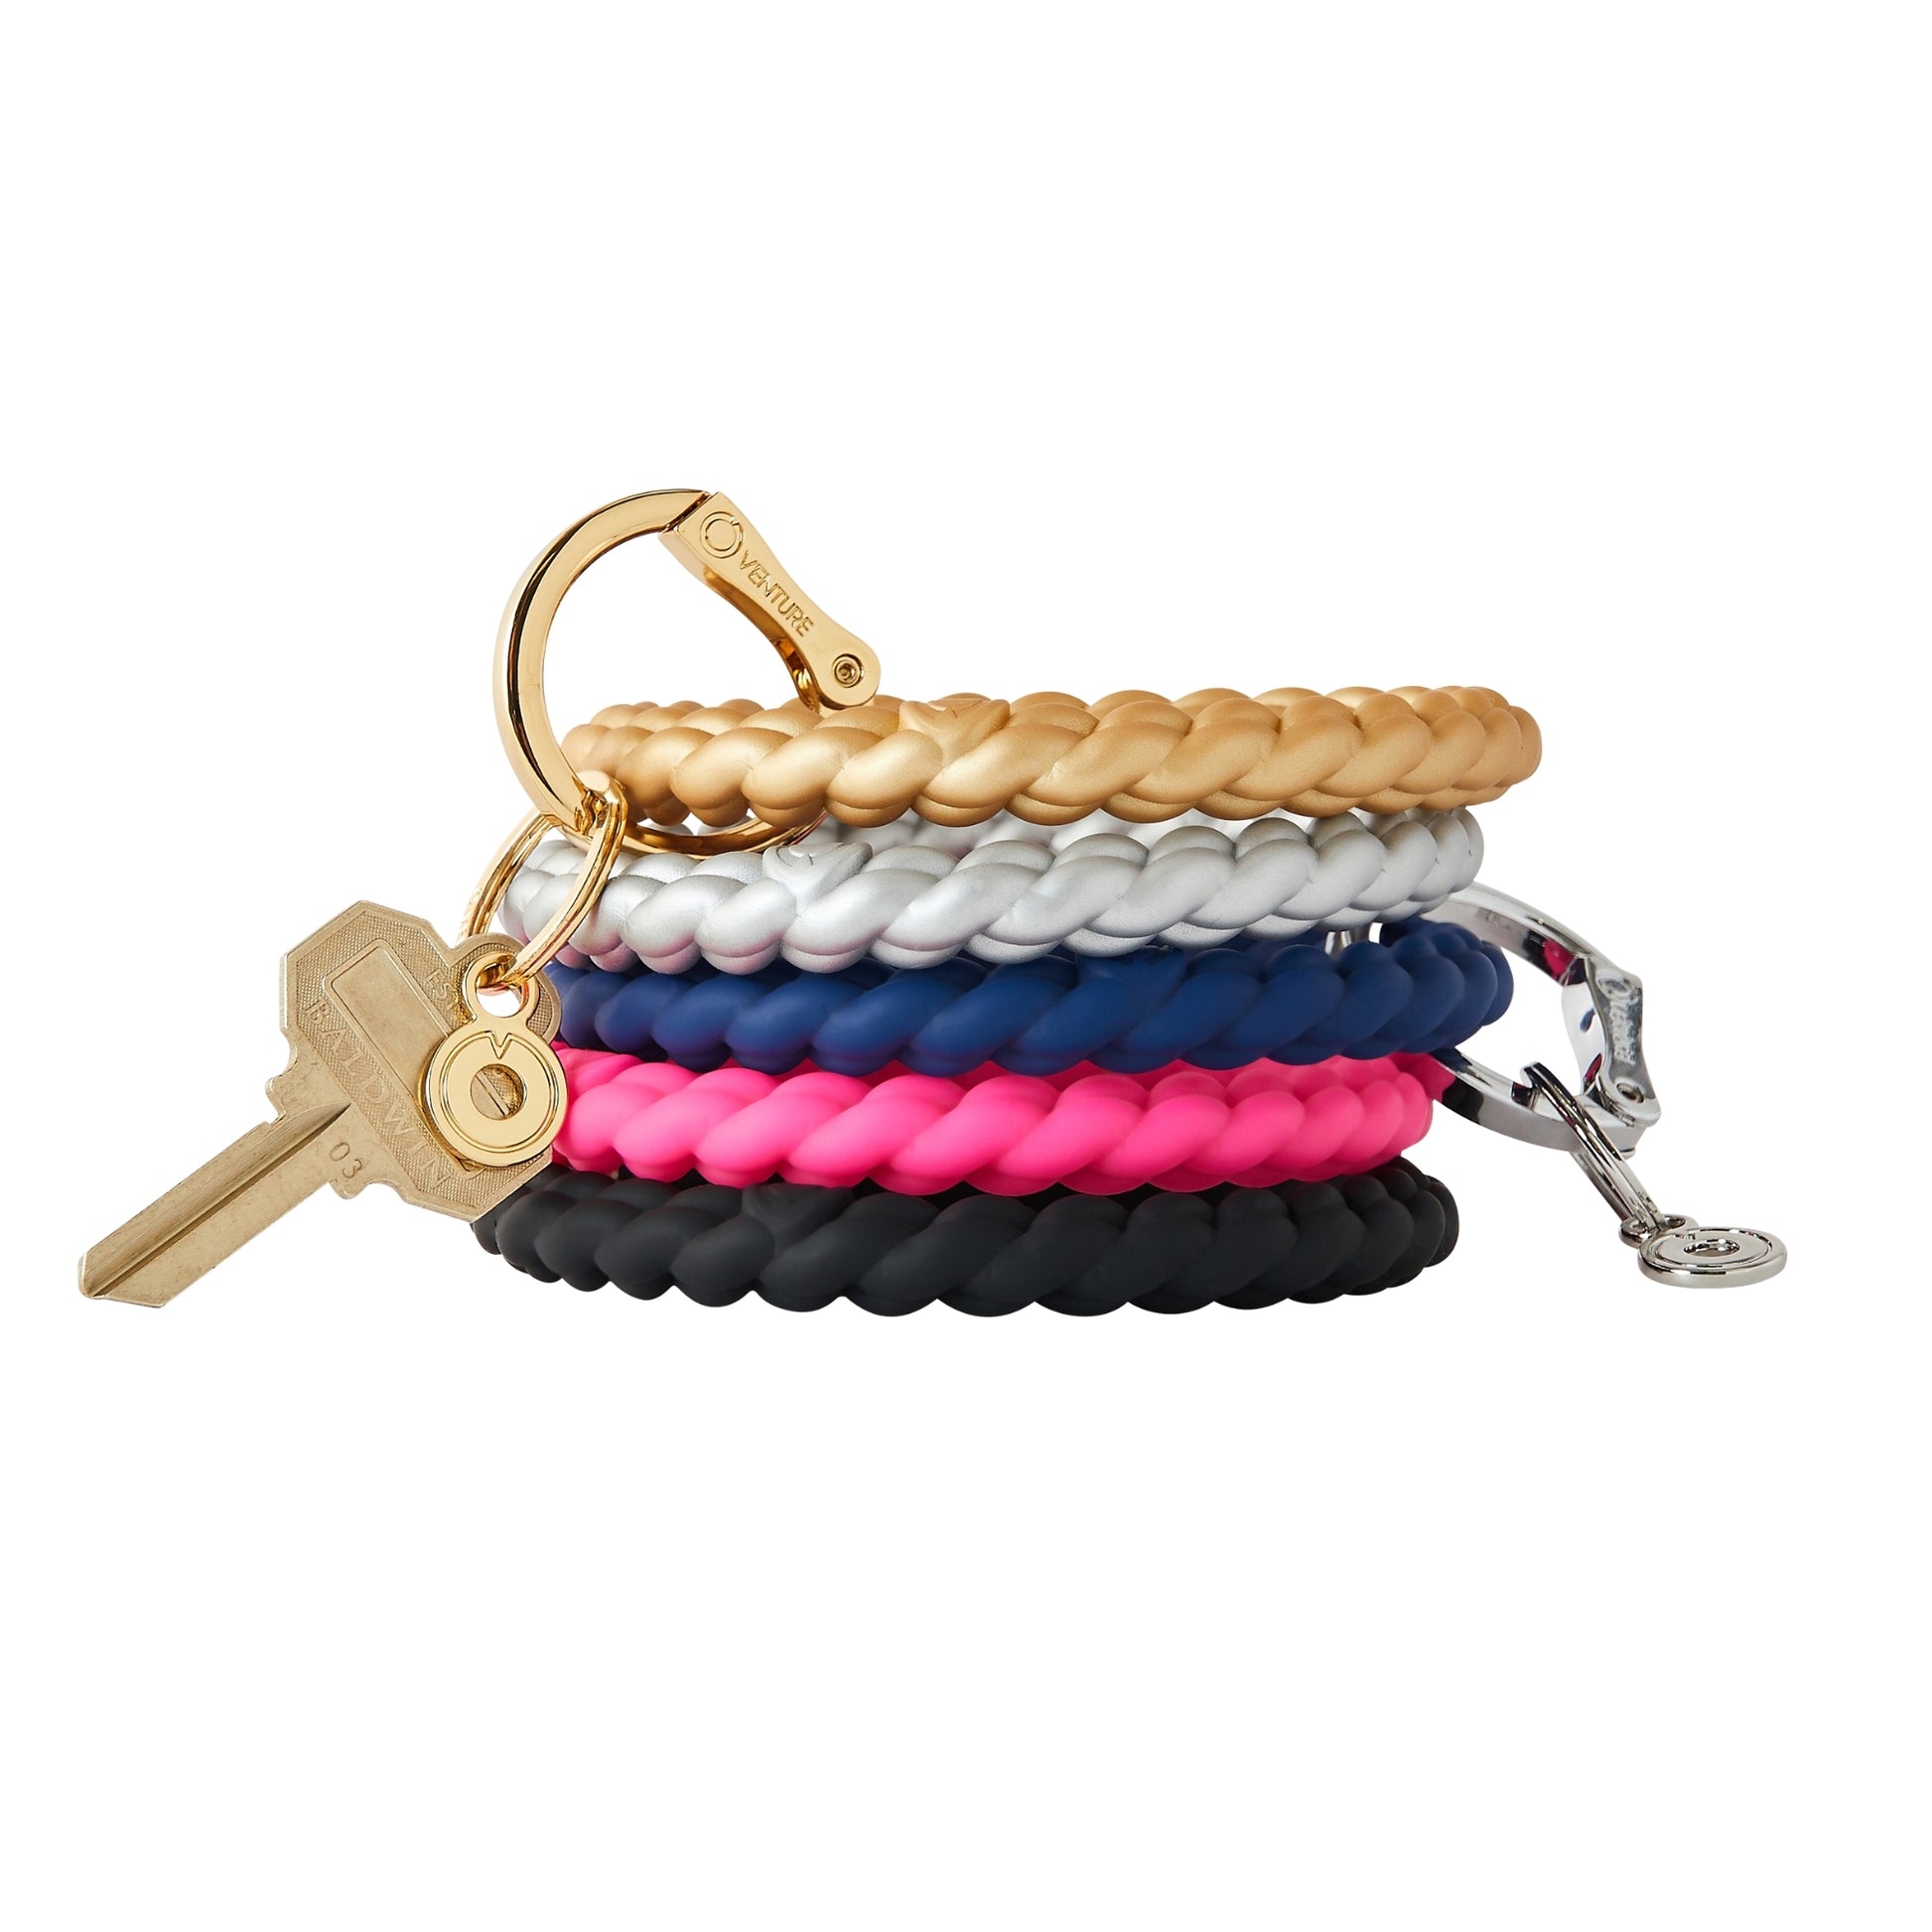 Oventure Leather Big O Key Ring - in The Saddle Basketweave